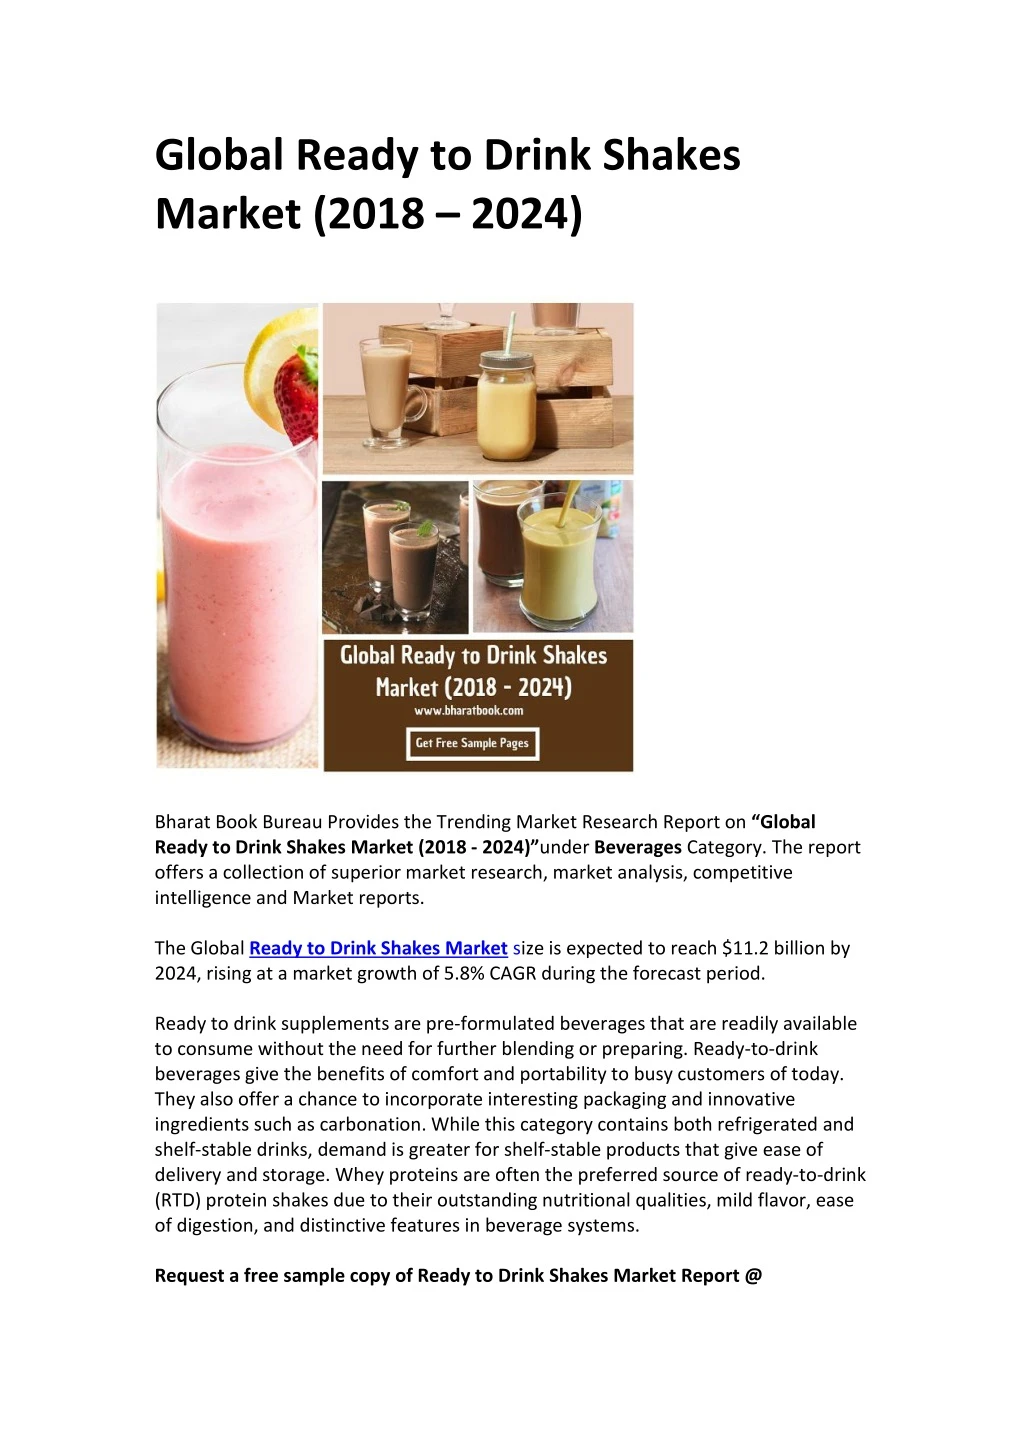 global ready to drink shakes market 2018 2024